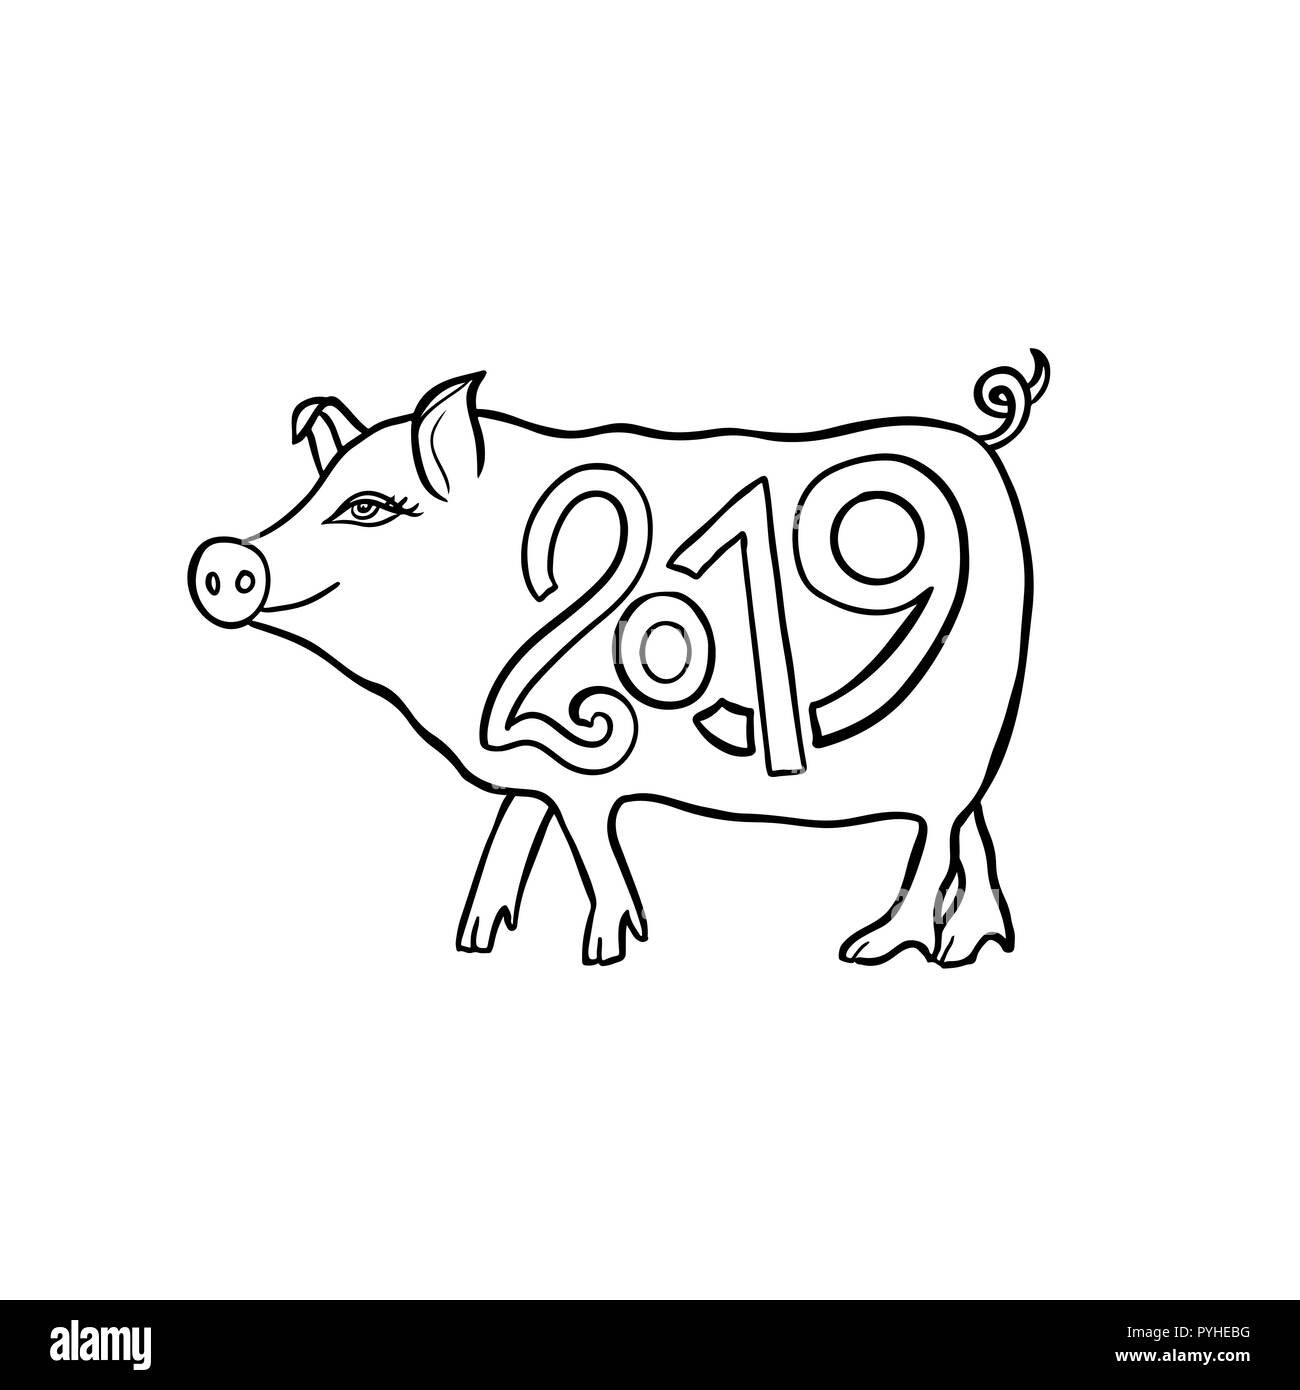 Asian new year sign. Funny pig. 2019 vector illustration. Stock Vector